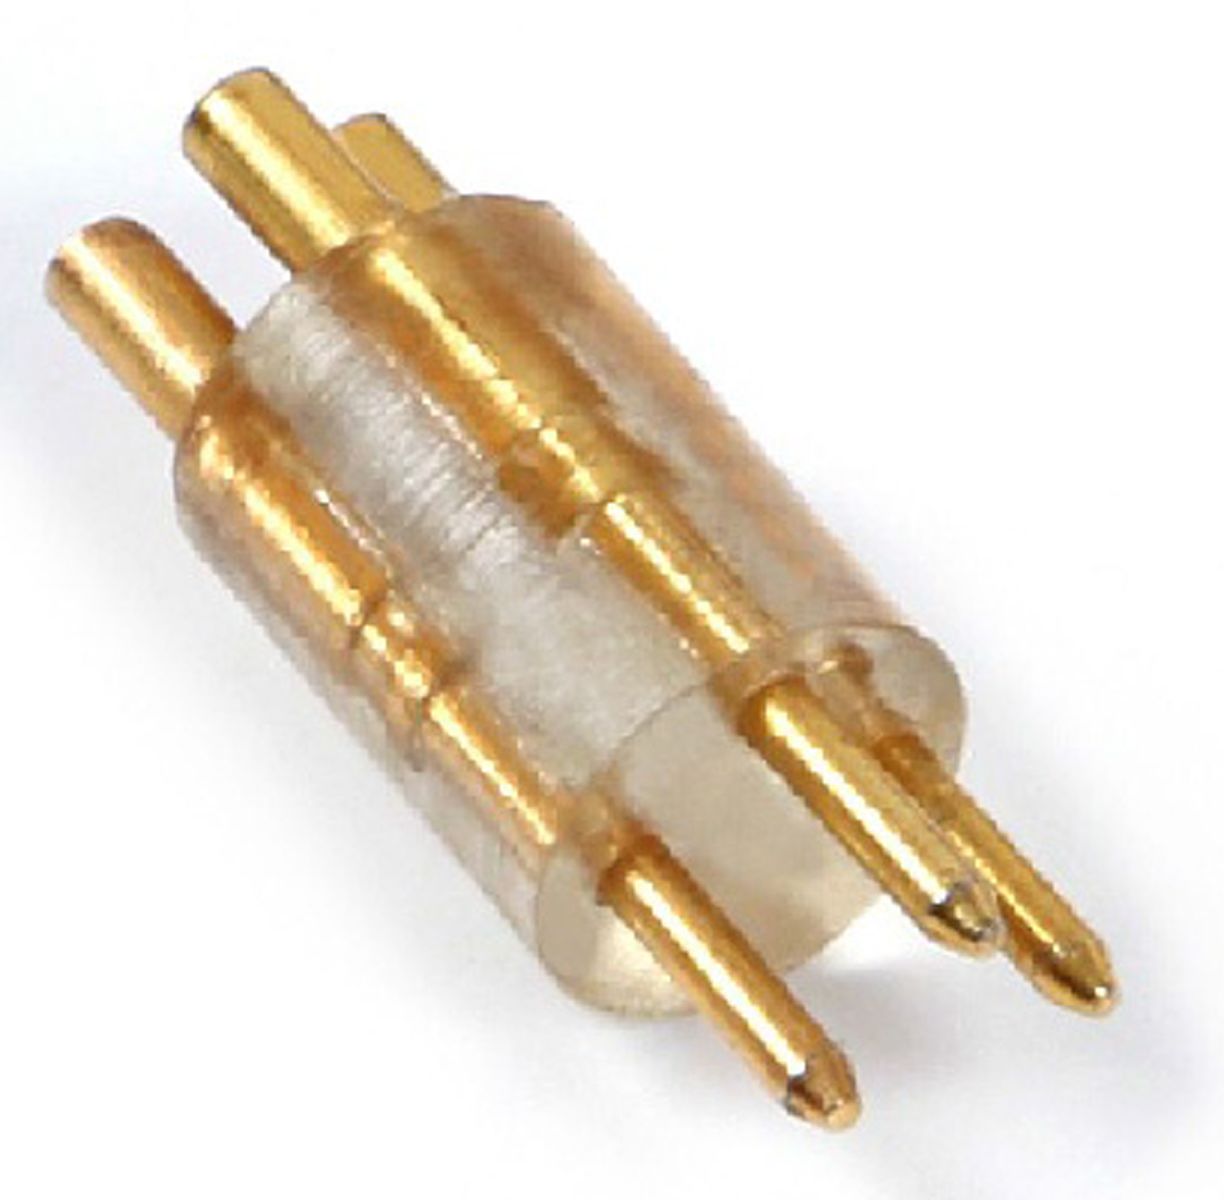 RS PRO Male Plug-In Circular Connector Contact, Contact Size 3